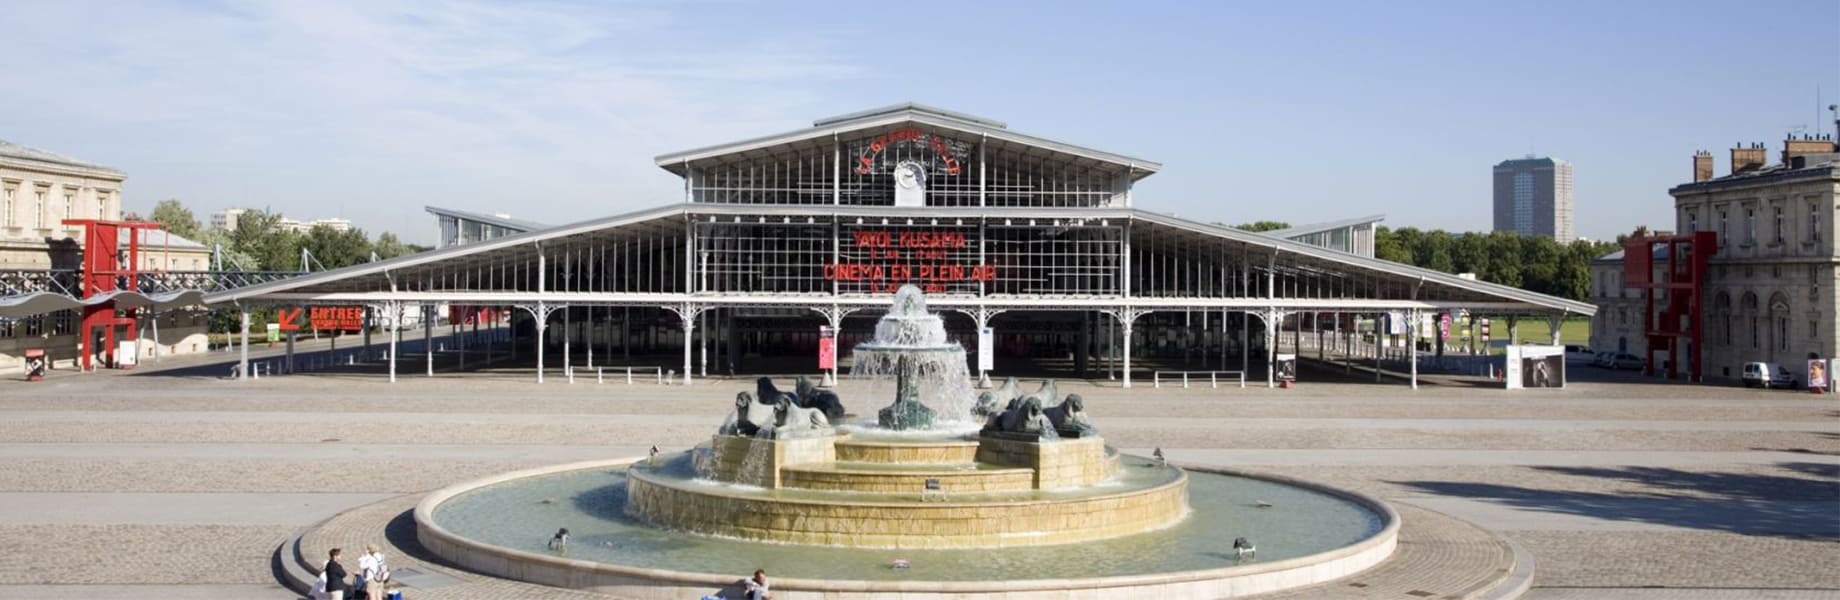 La Villette parc and cultural centre manages its venues, activities, bookings and contacts with the DIESE system.